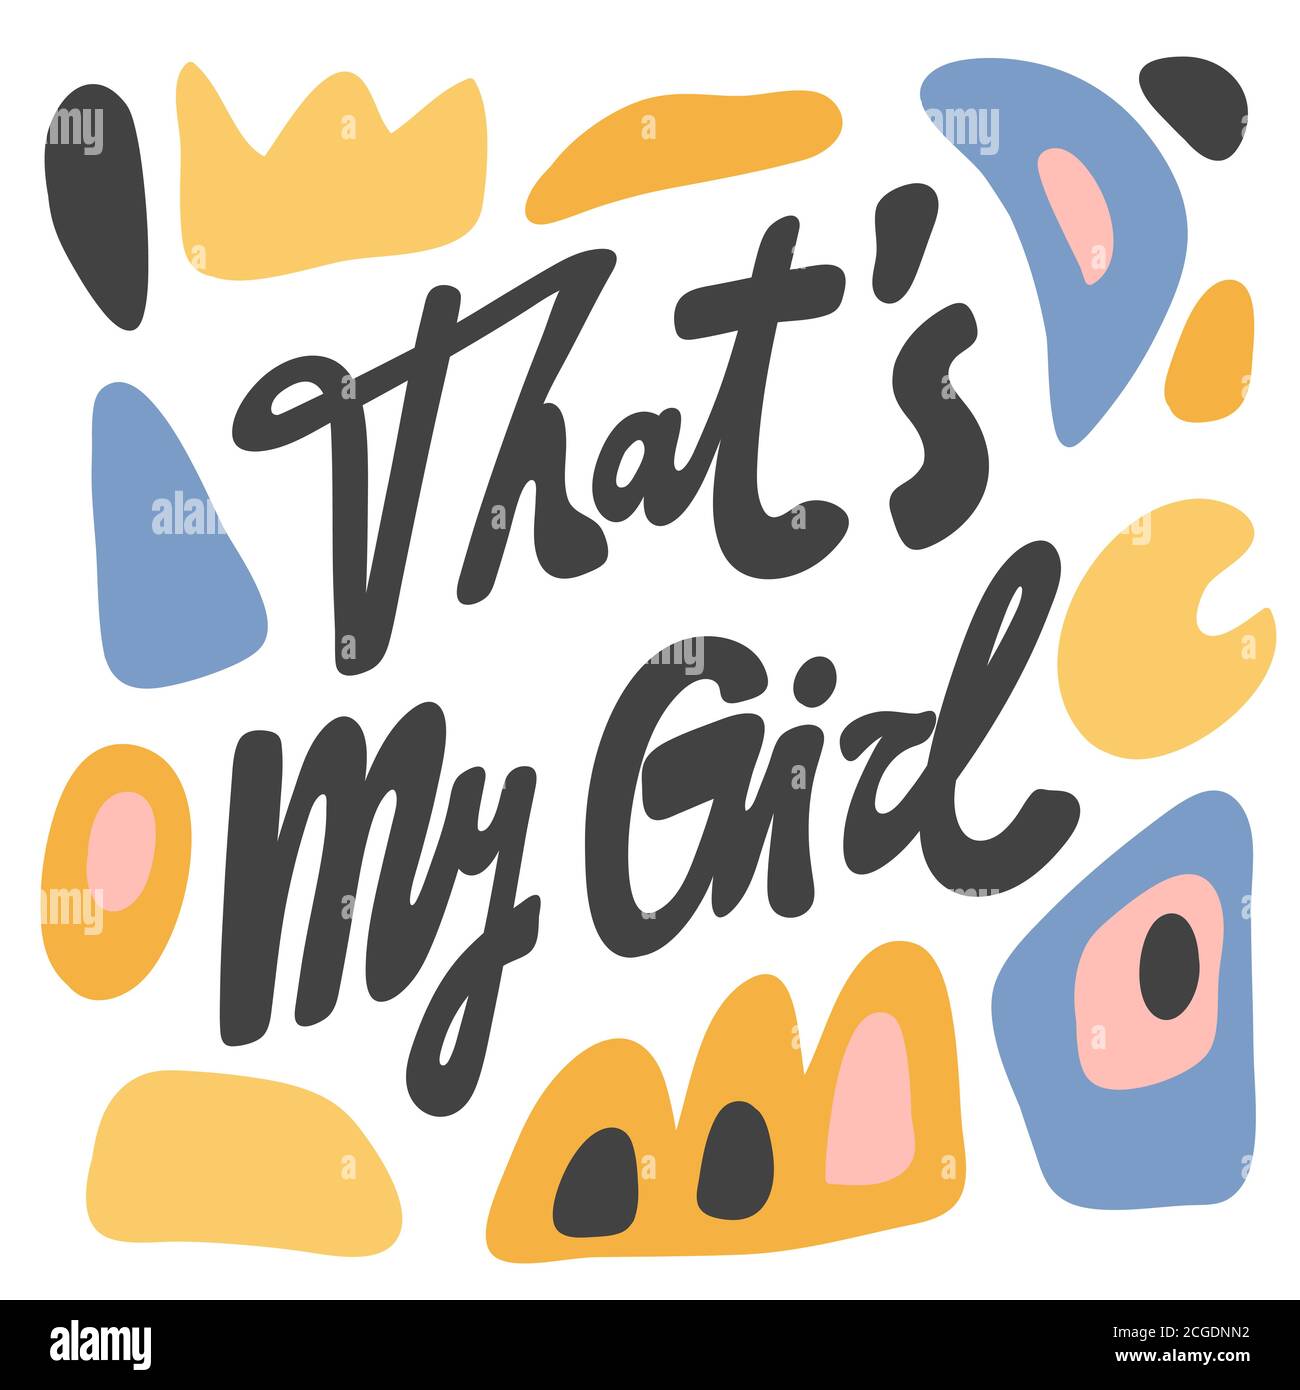 My girl.com is Ismygirl Reviews